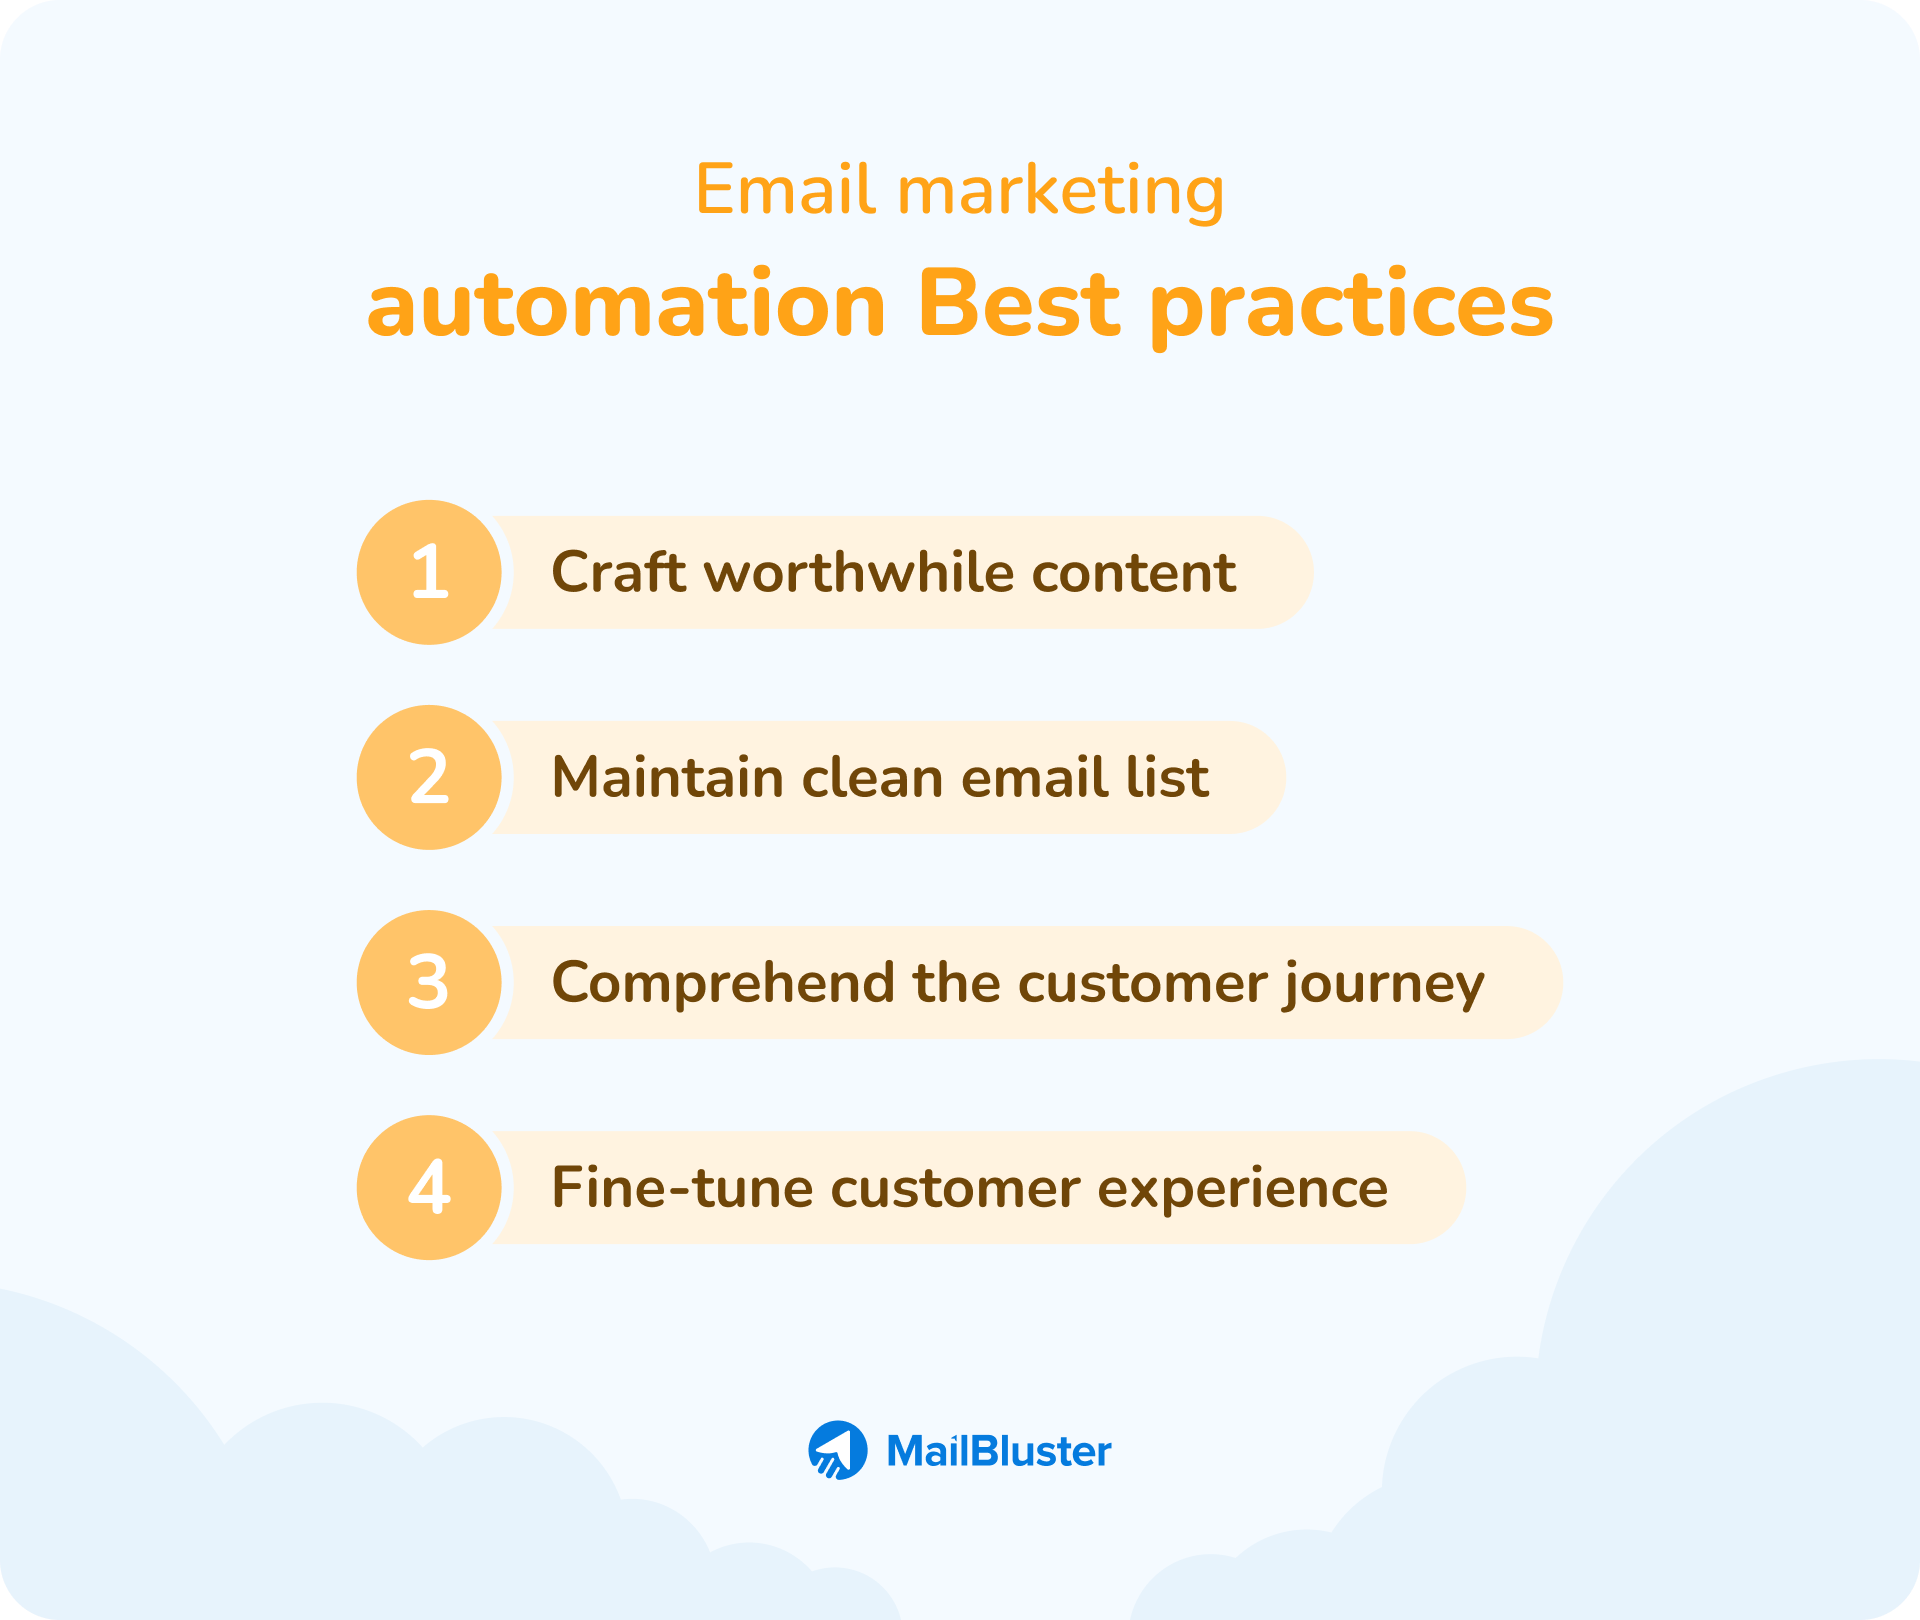 Email marketing automation Best practices 4 steps